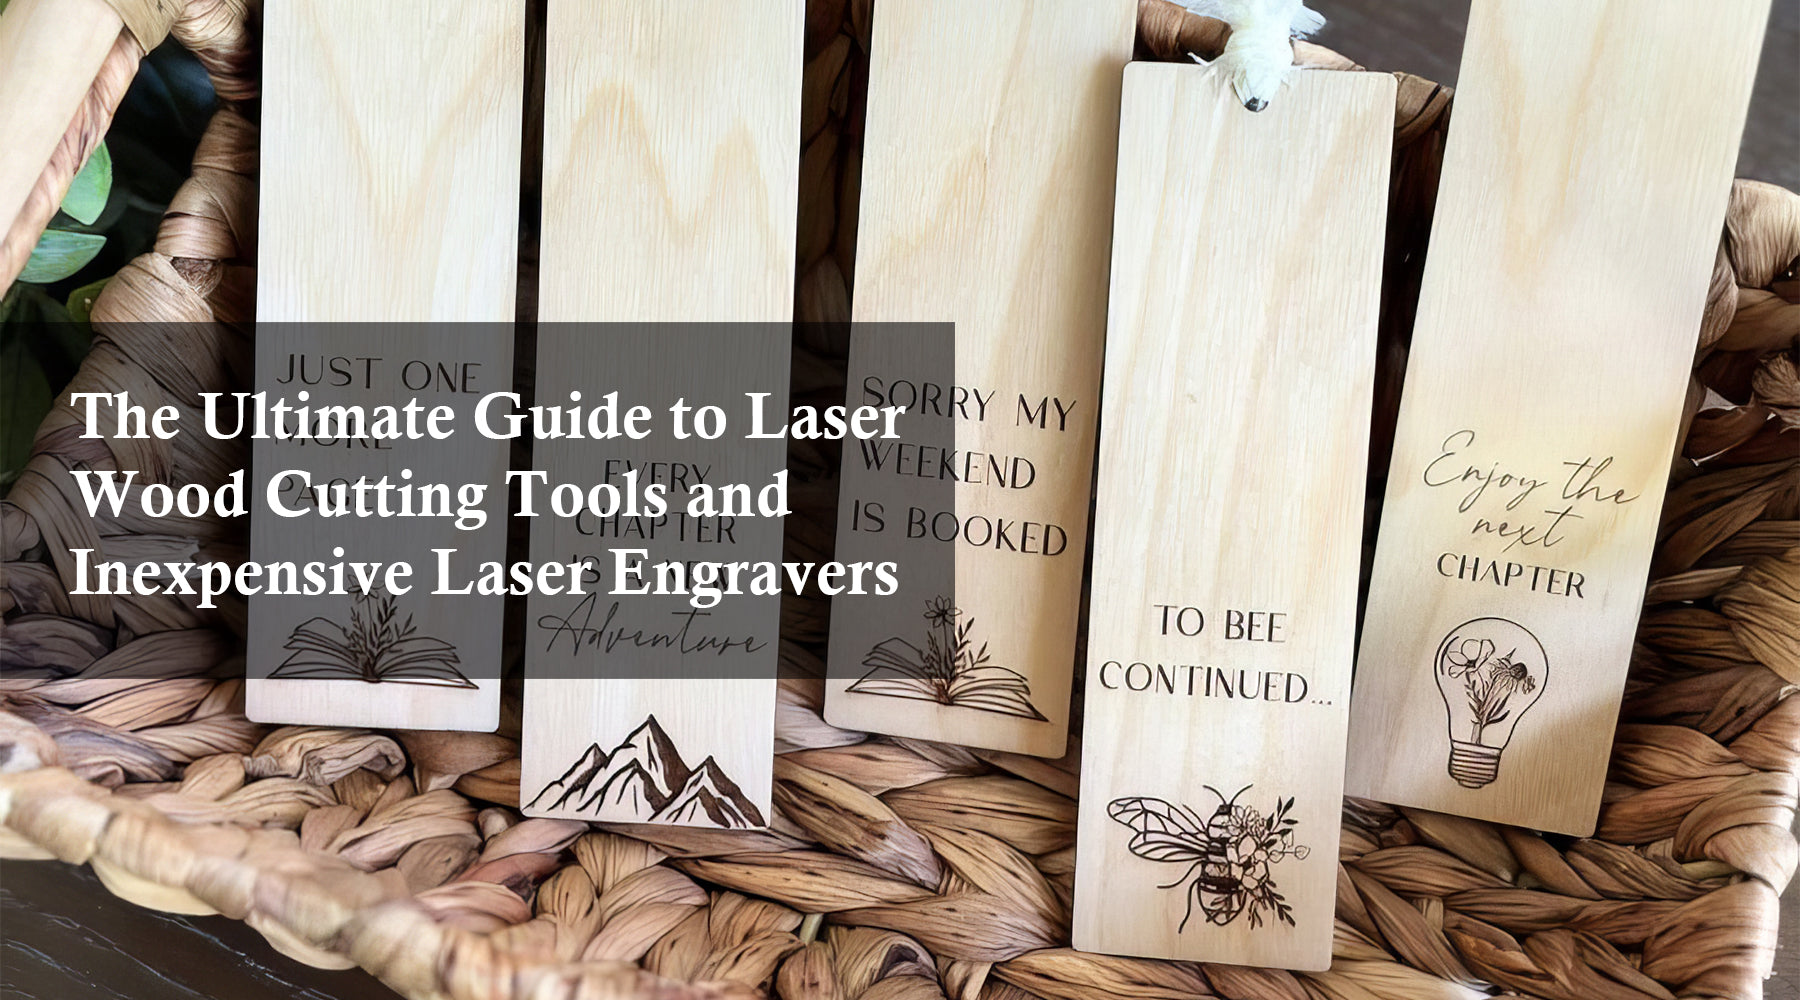 The Ultimate Guide to Laser Wood Cutting Tools and Inexpensive Laser Engravers